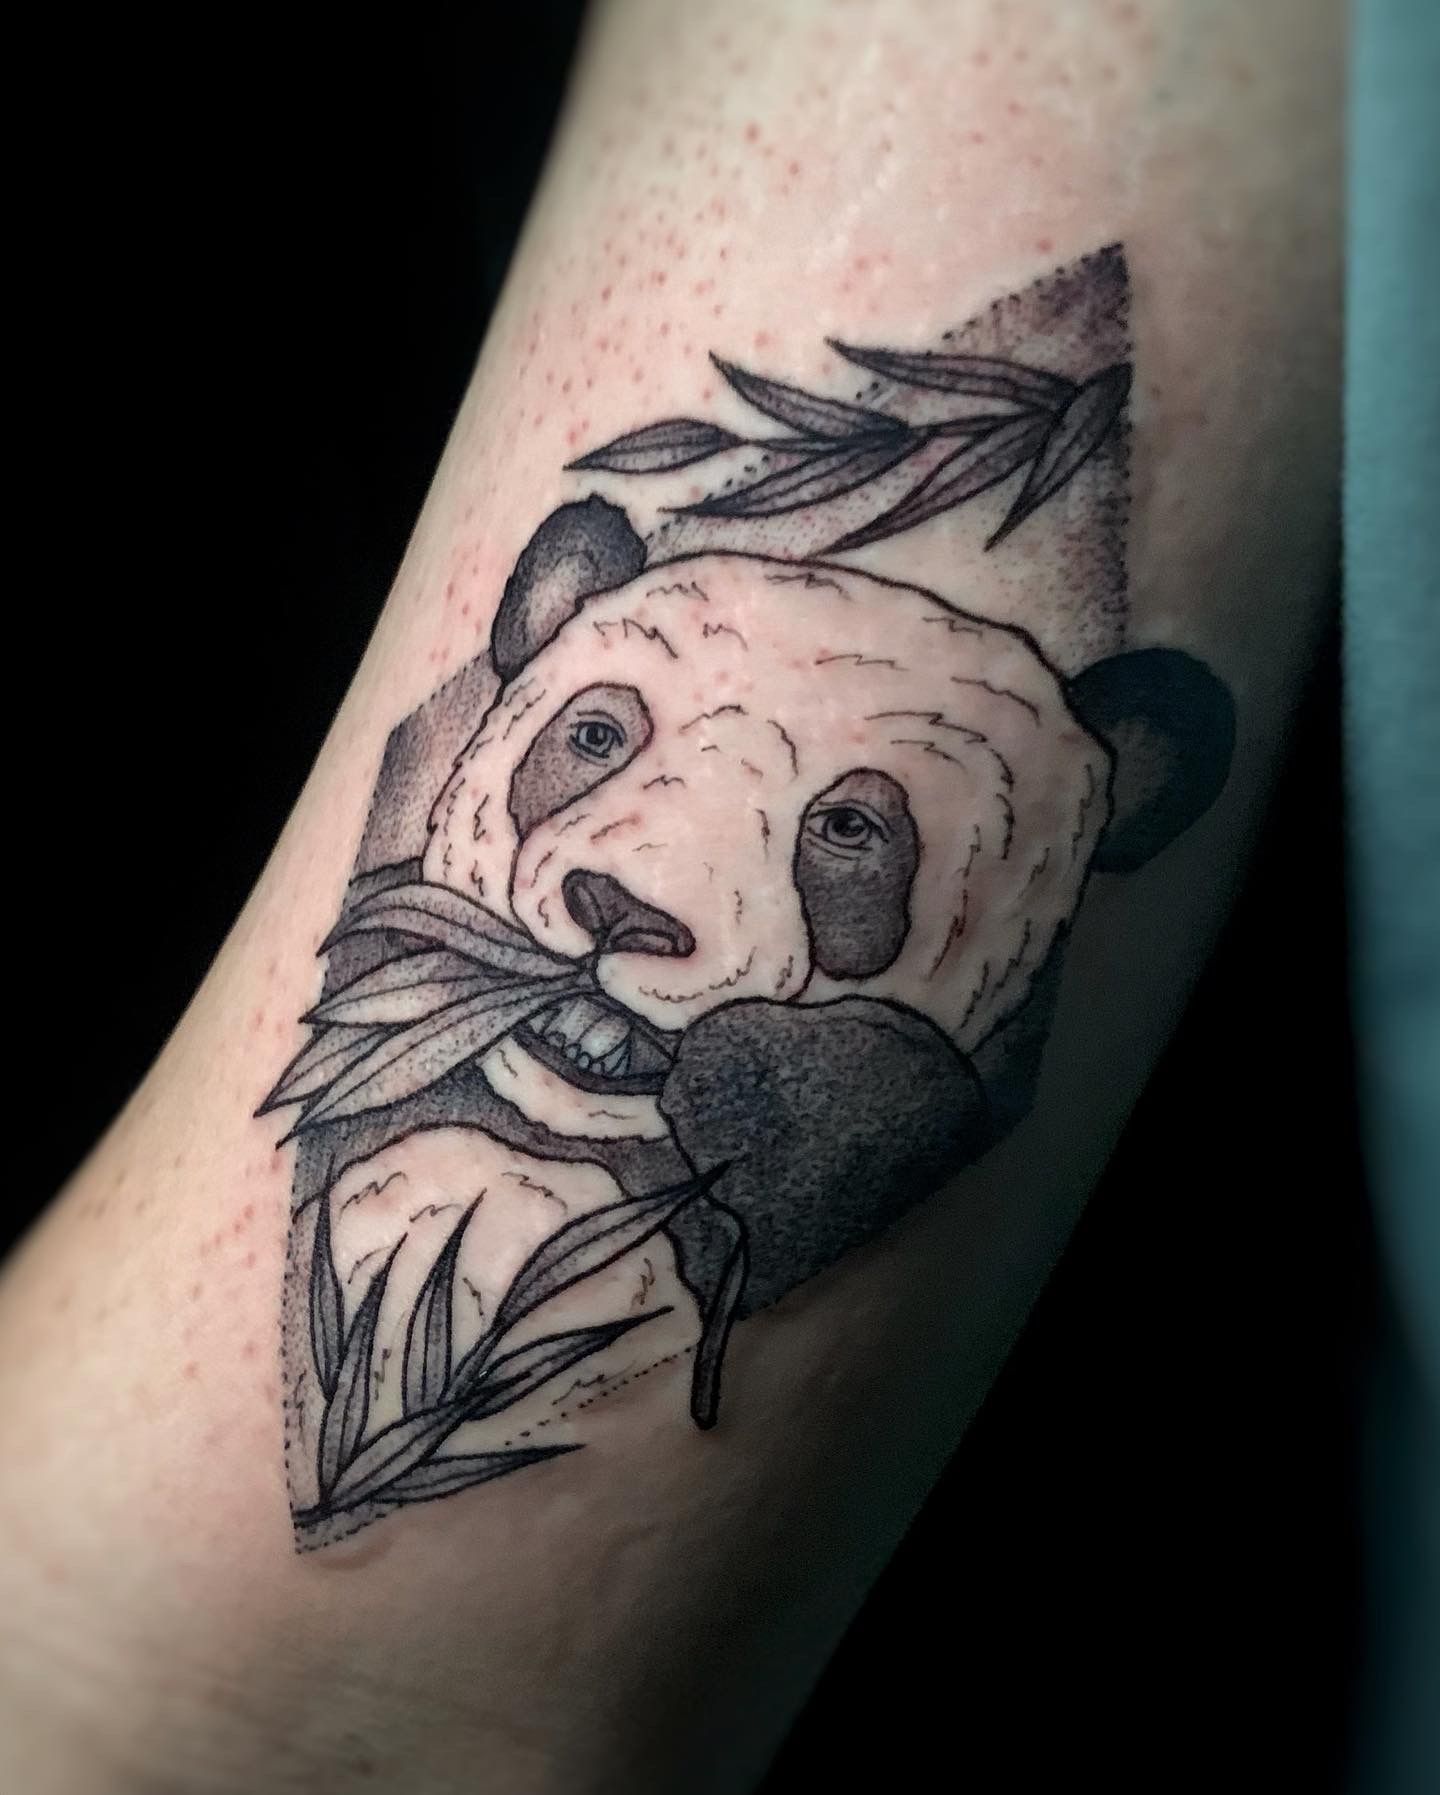 Captivating Panda Tattoos | From Playful Expressions To Striking Simplicity